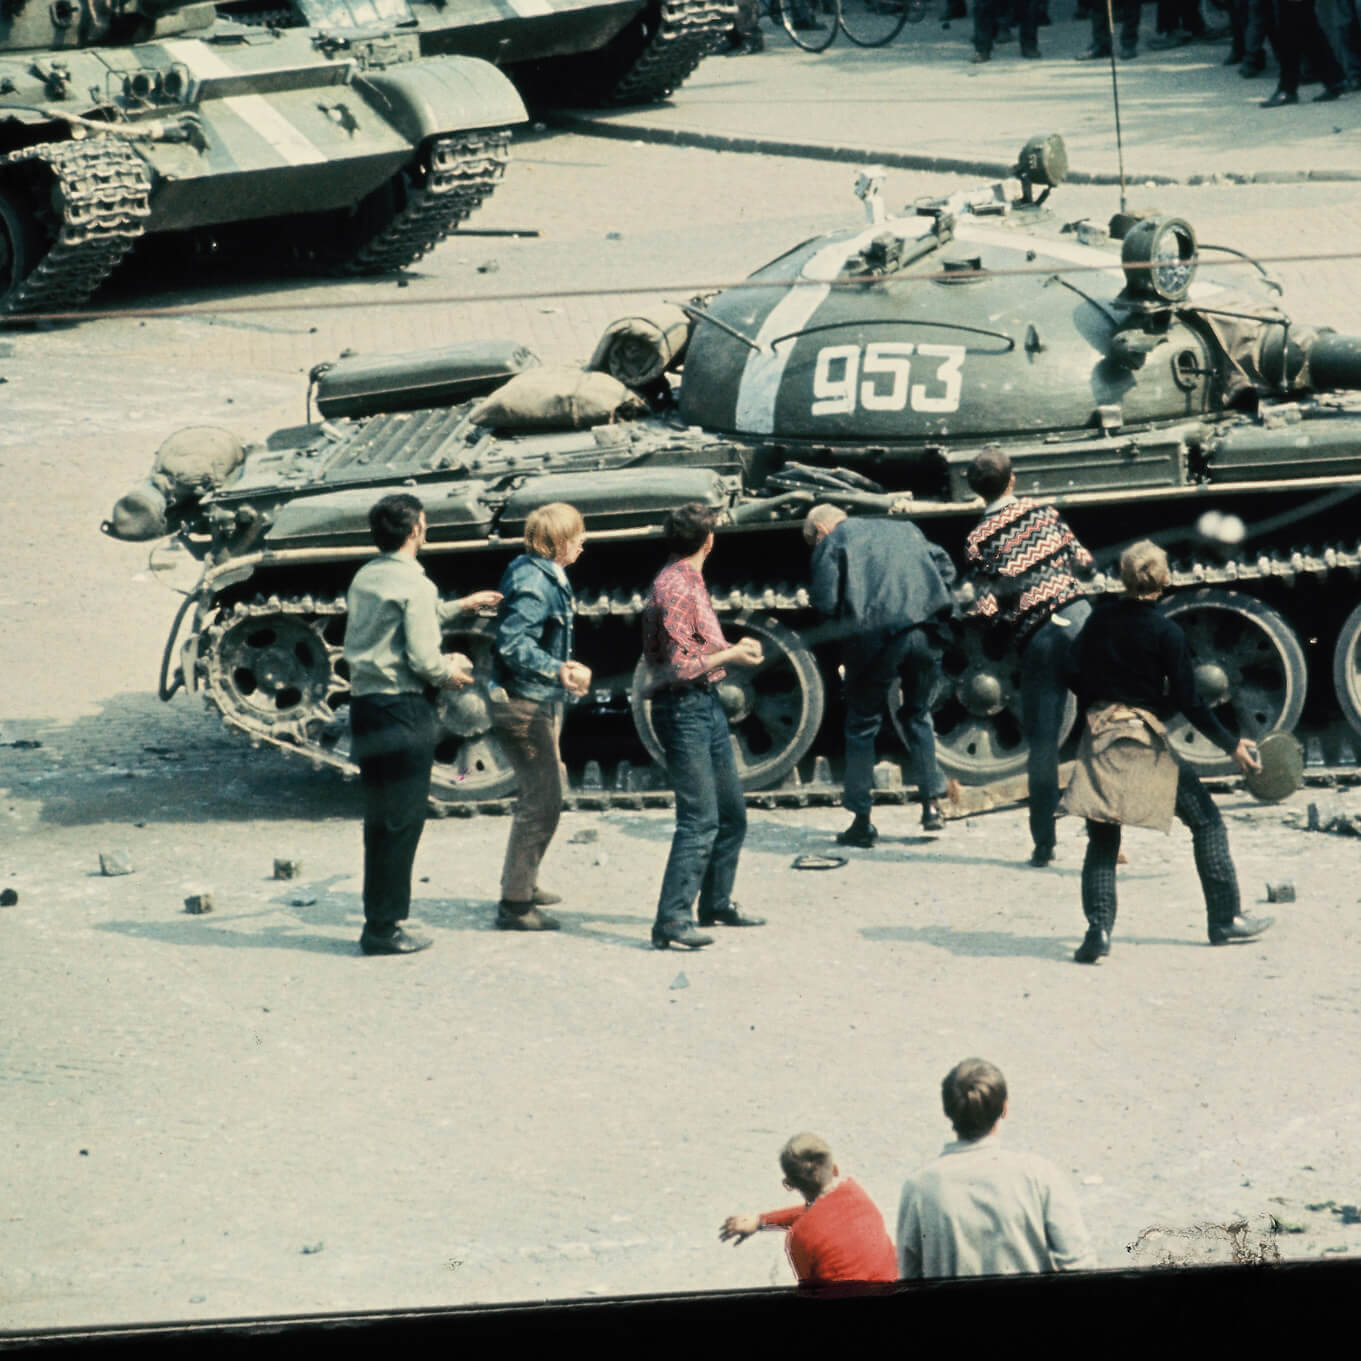 1968 – Proteste, Aufbruch